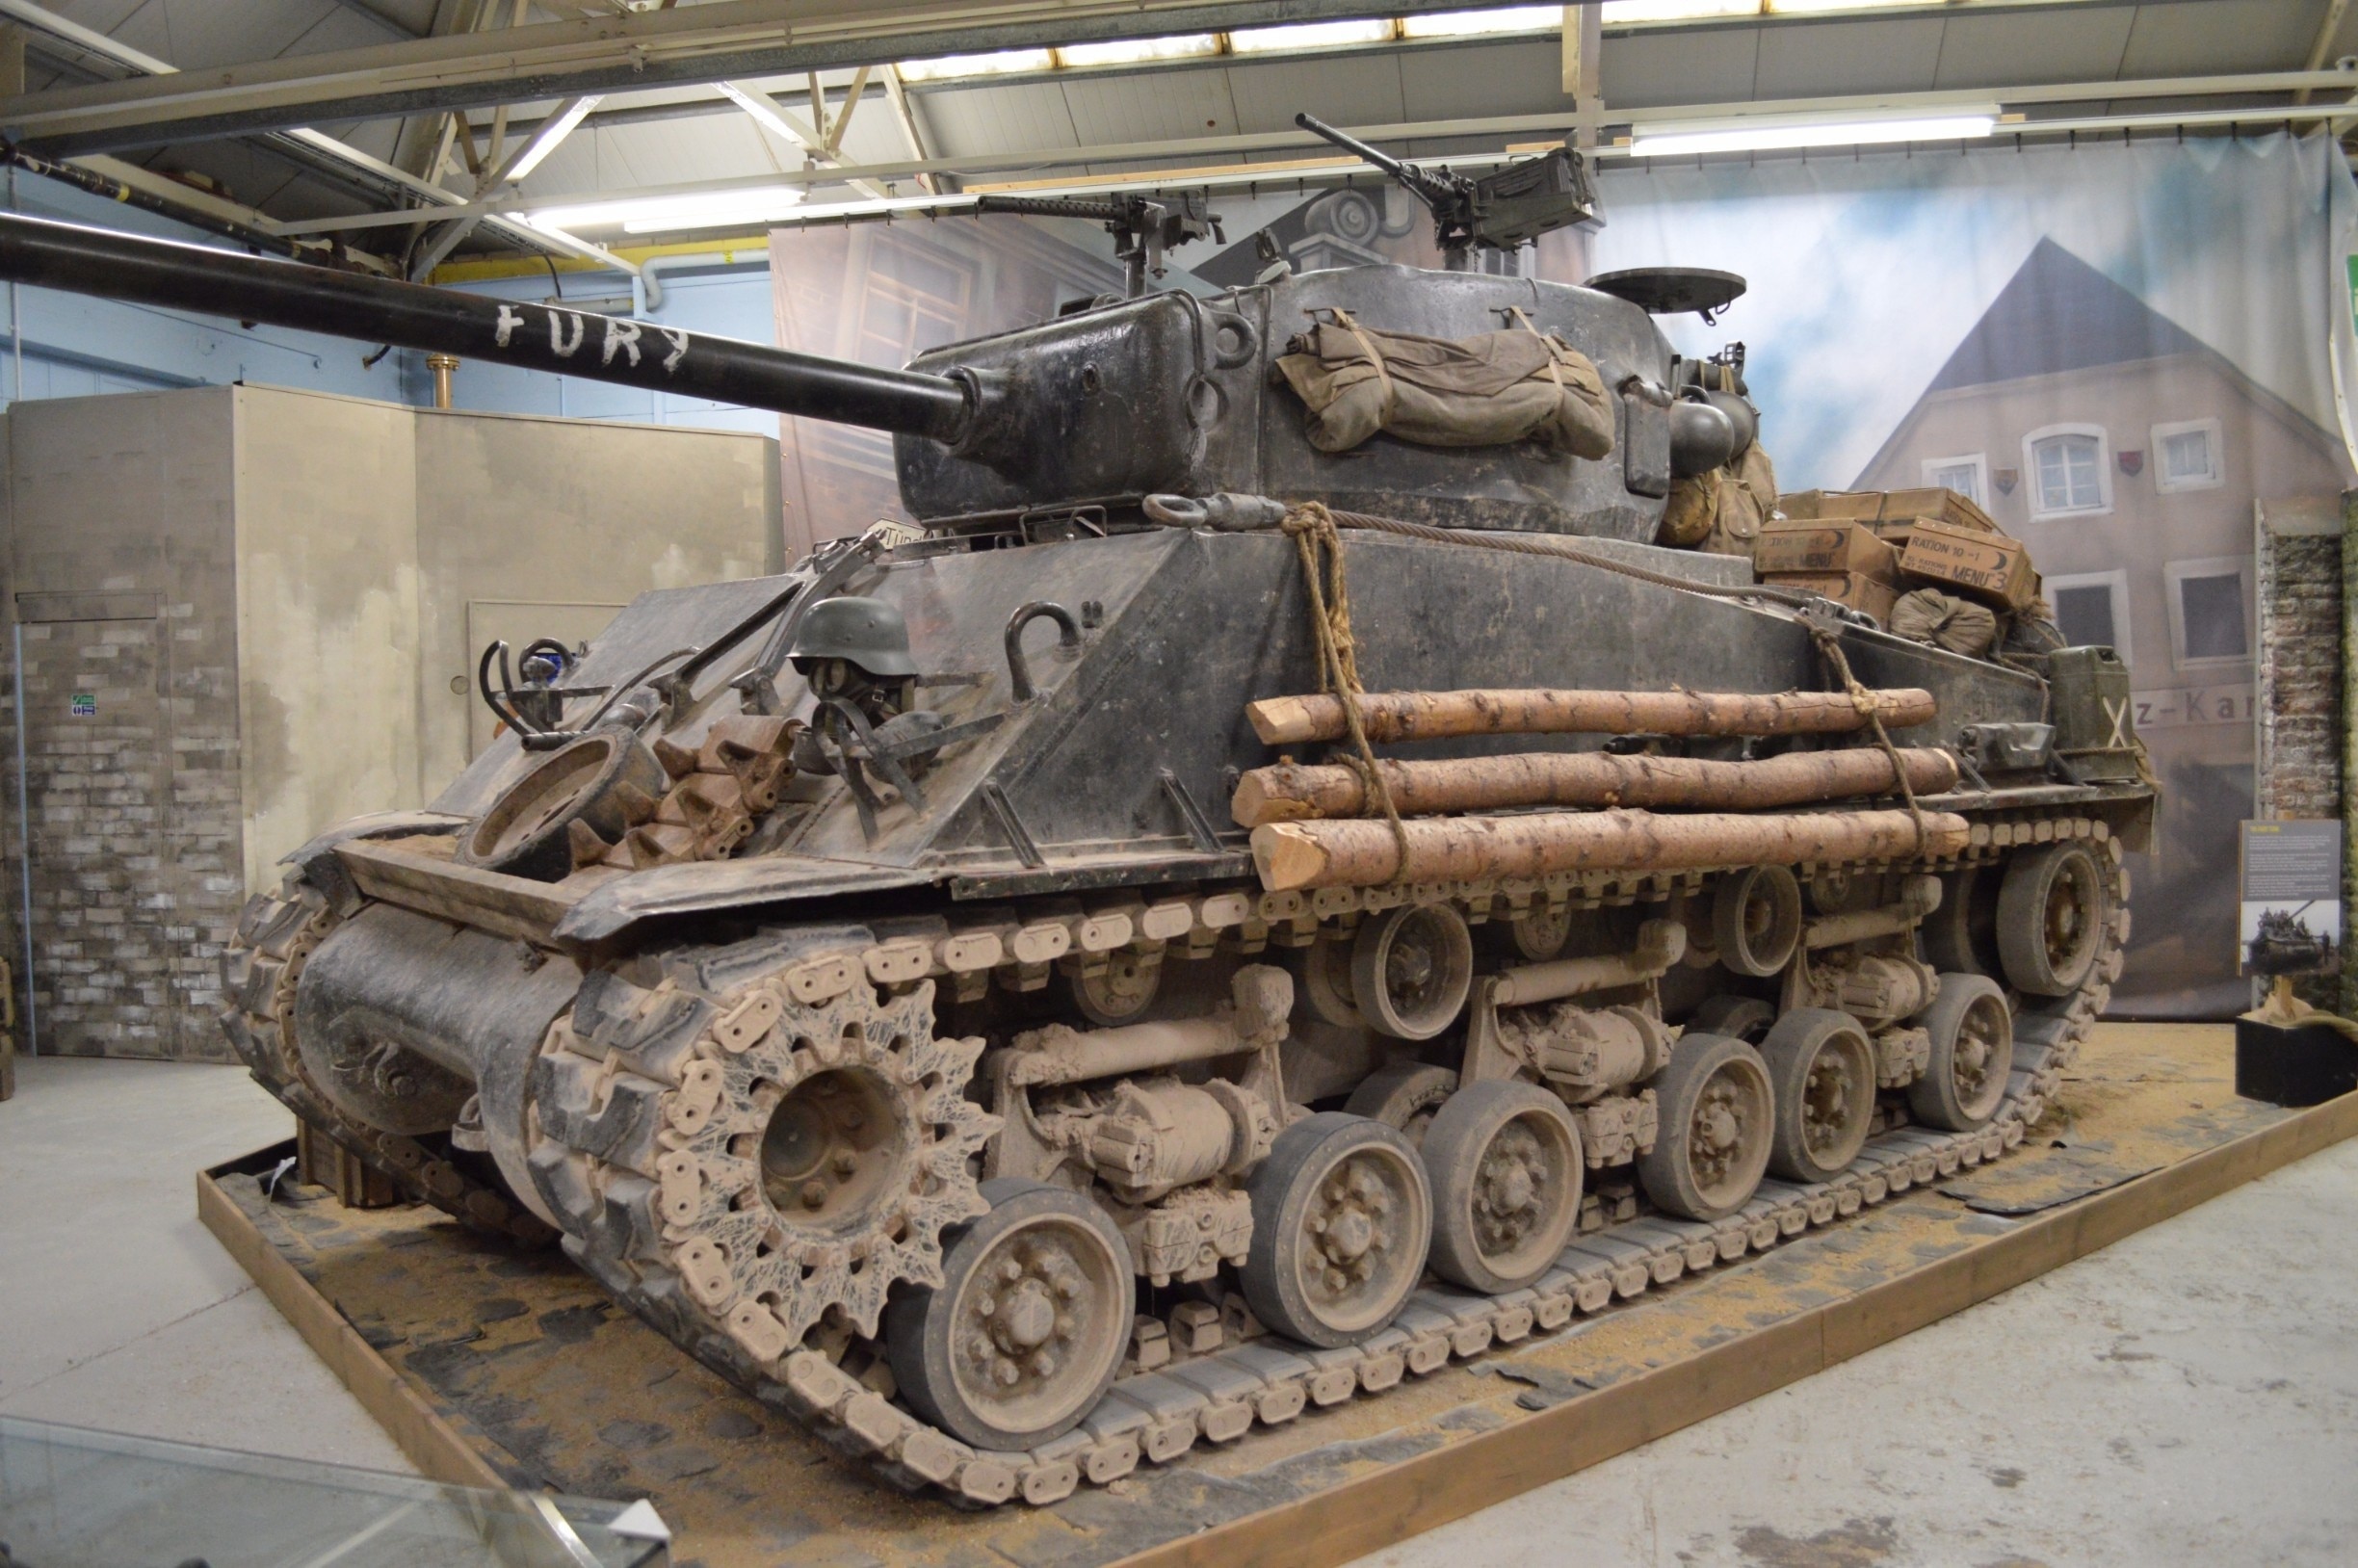 #EndlessSummer  , tank museum is a great place to spend a day looking at all the vehicle's . you even get to see the stars of the film "Fury"